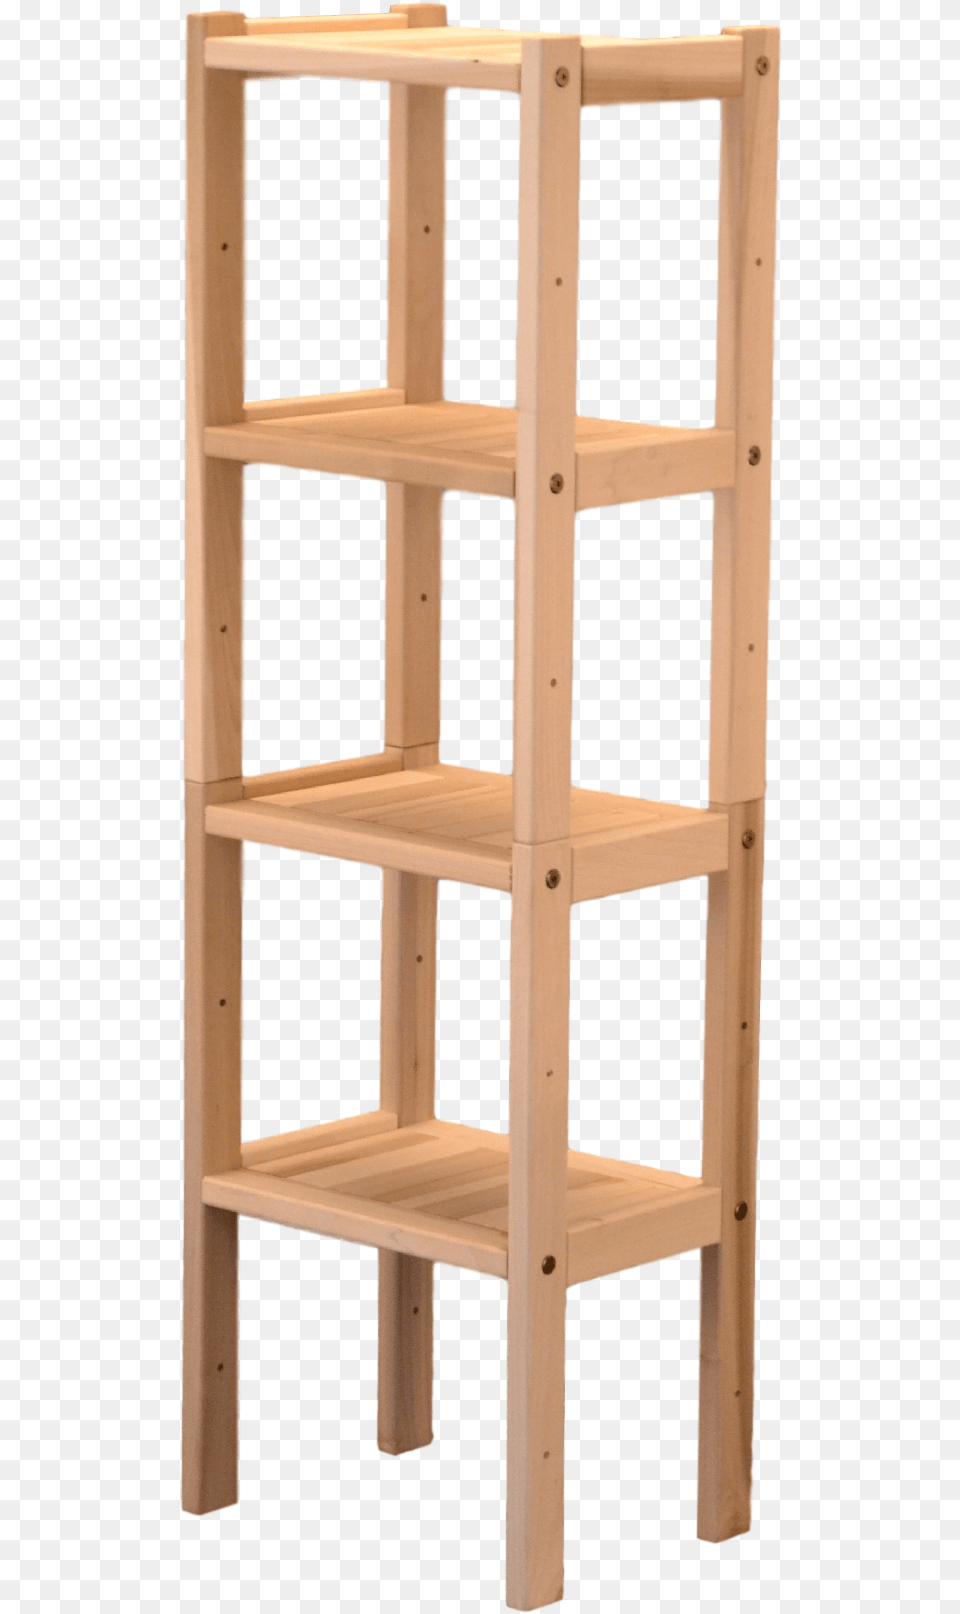 Shelf, Wood, Furniture, Chair, Plywood Png